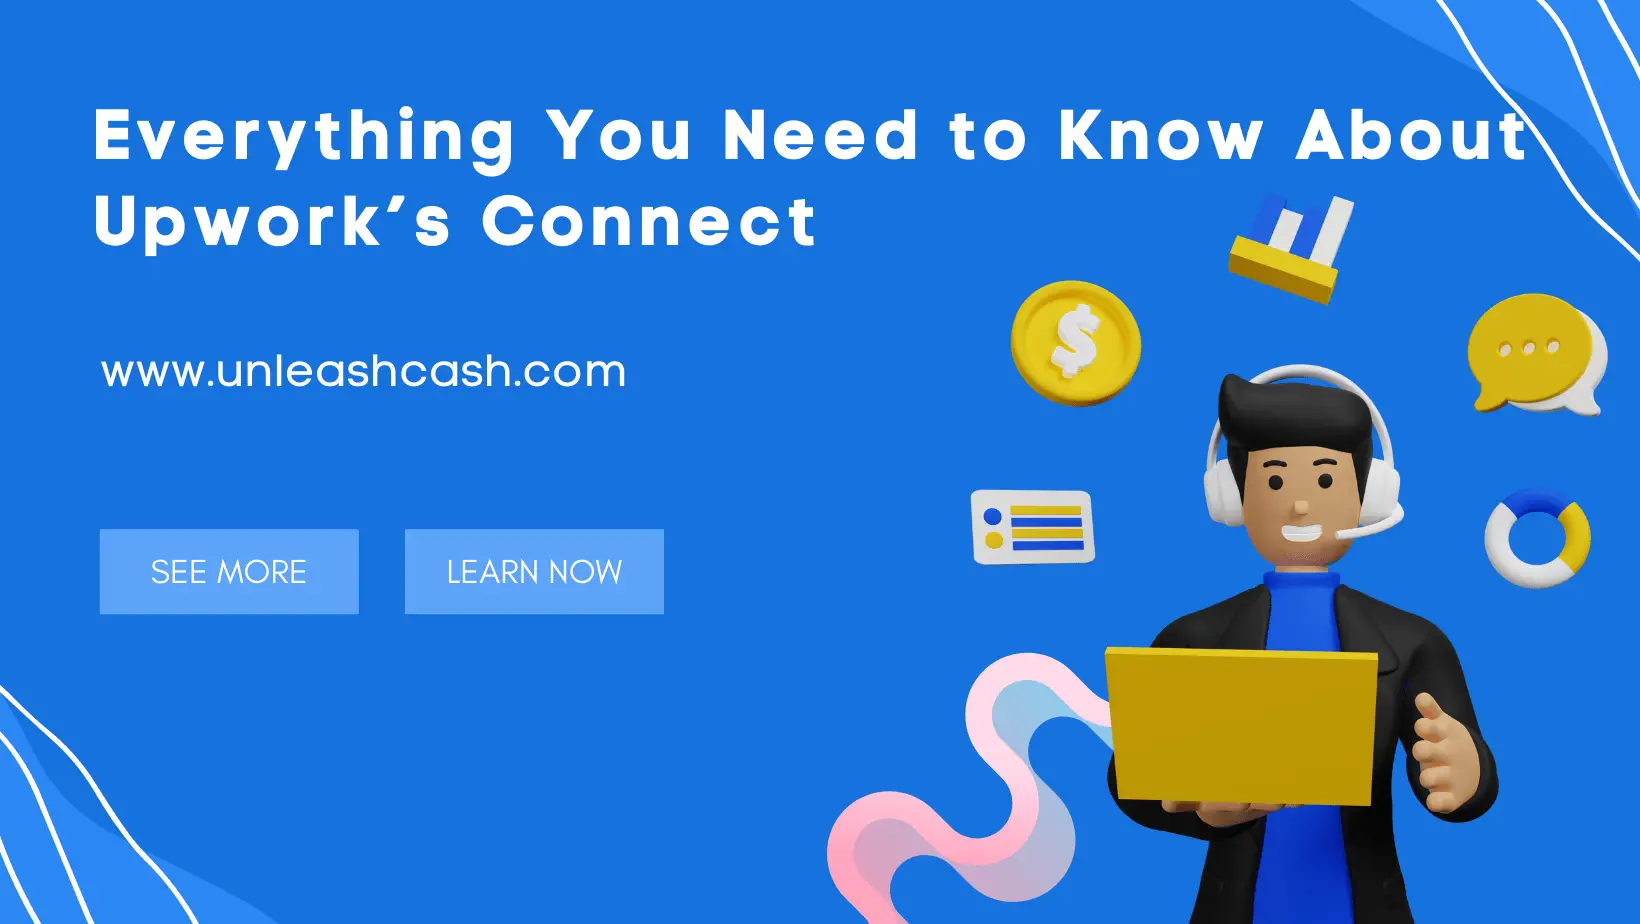 Everything You Need to Know About Upwork’s Connect